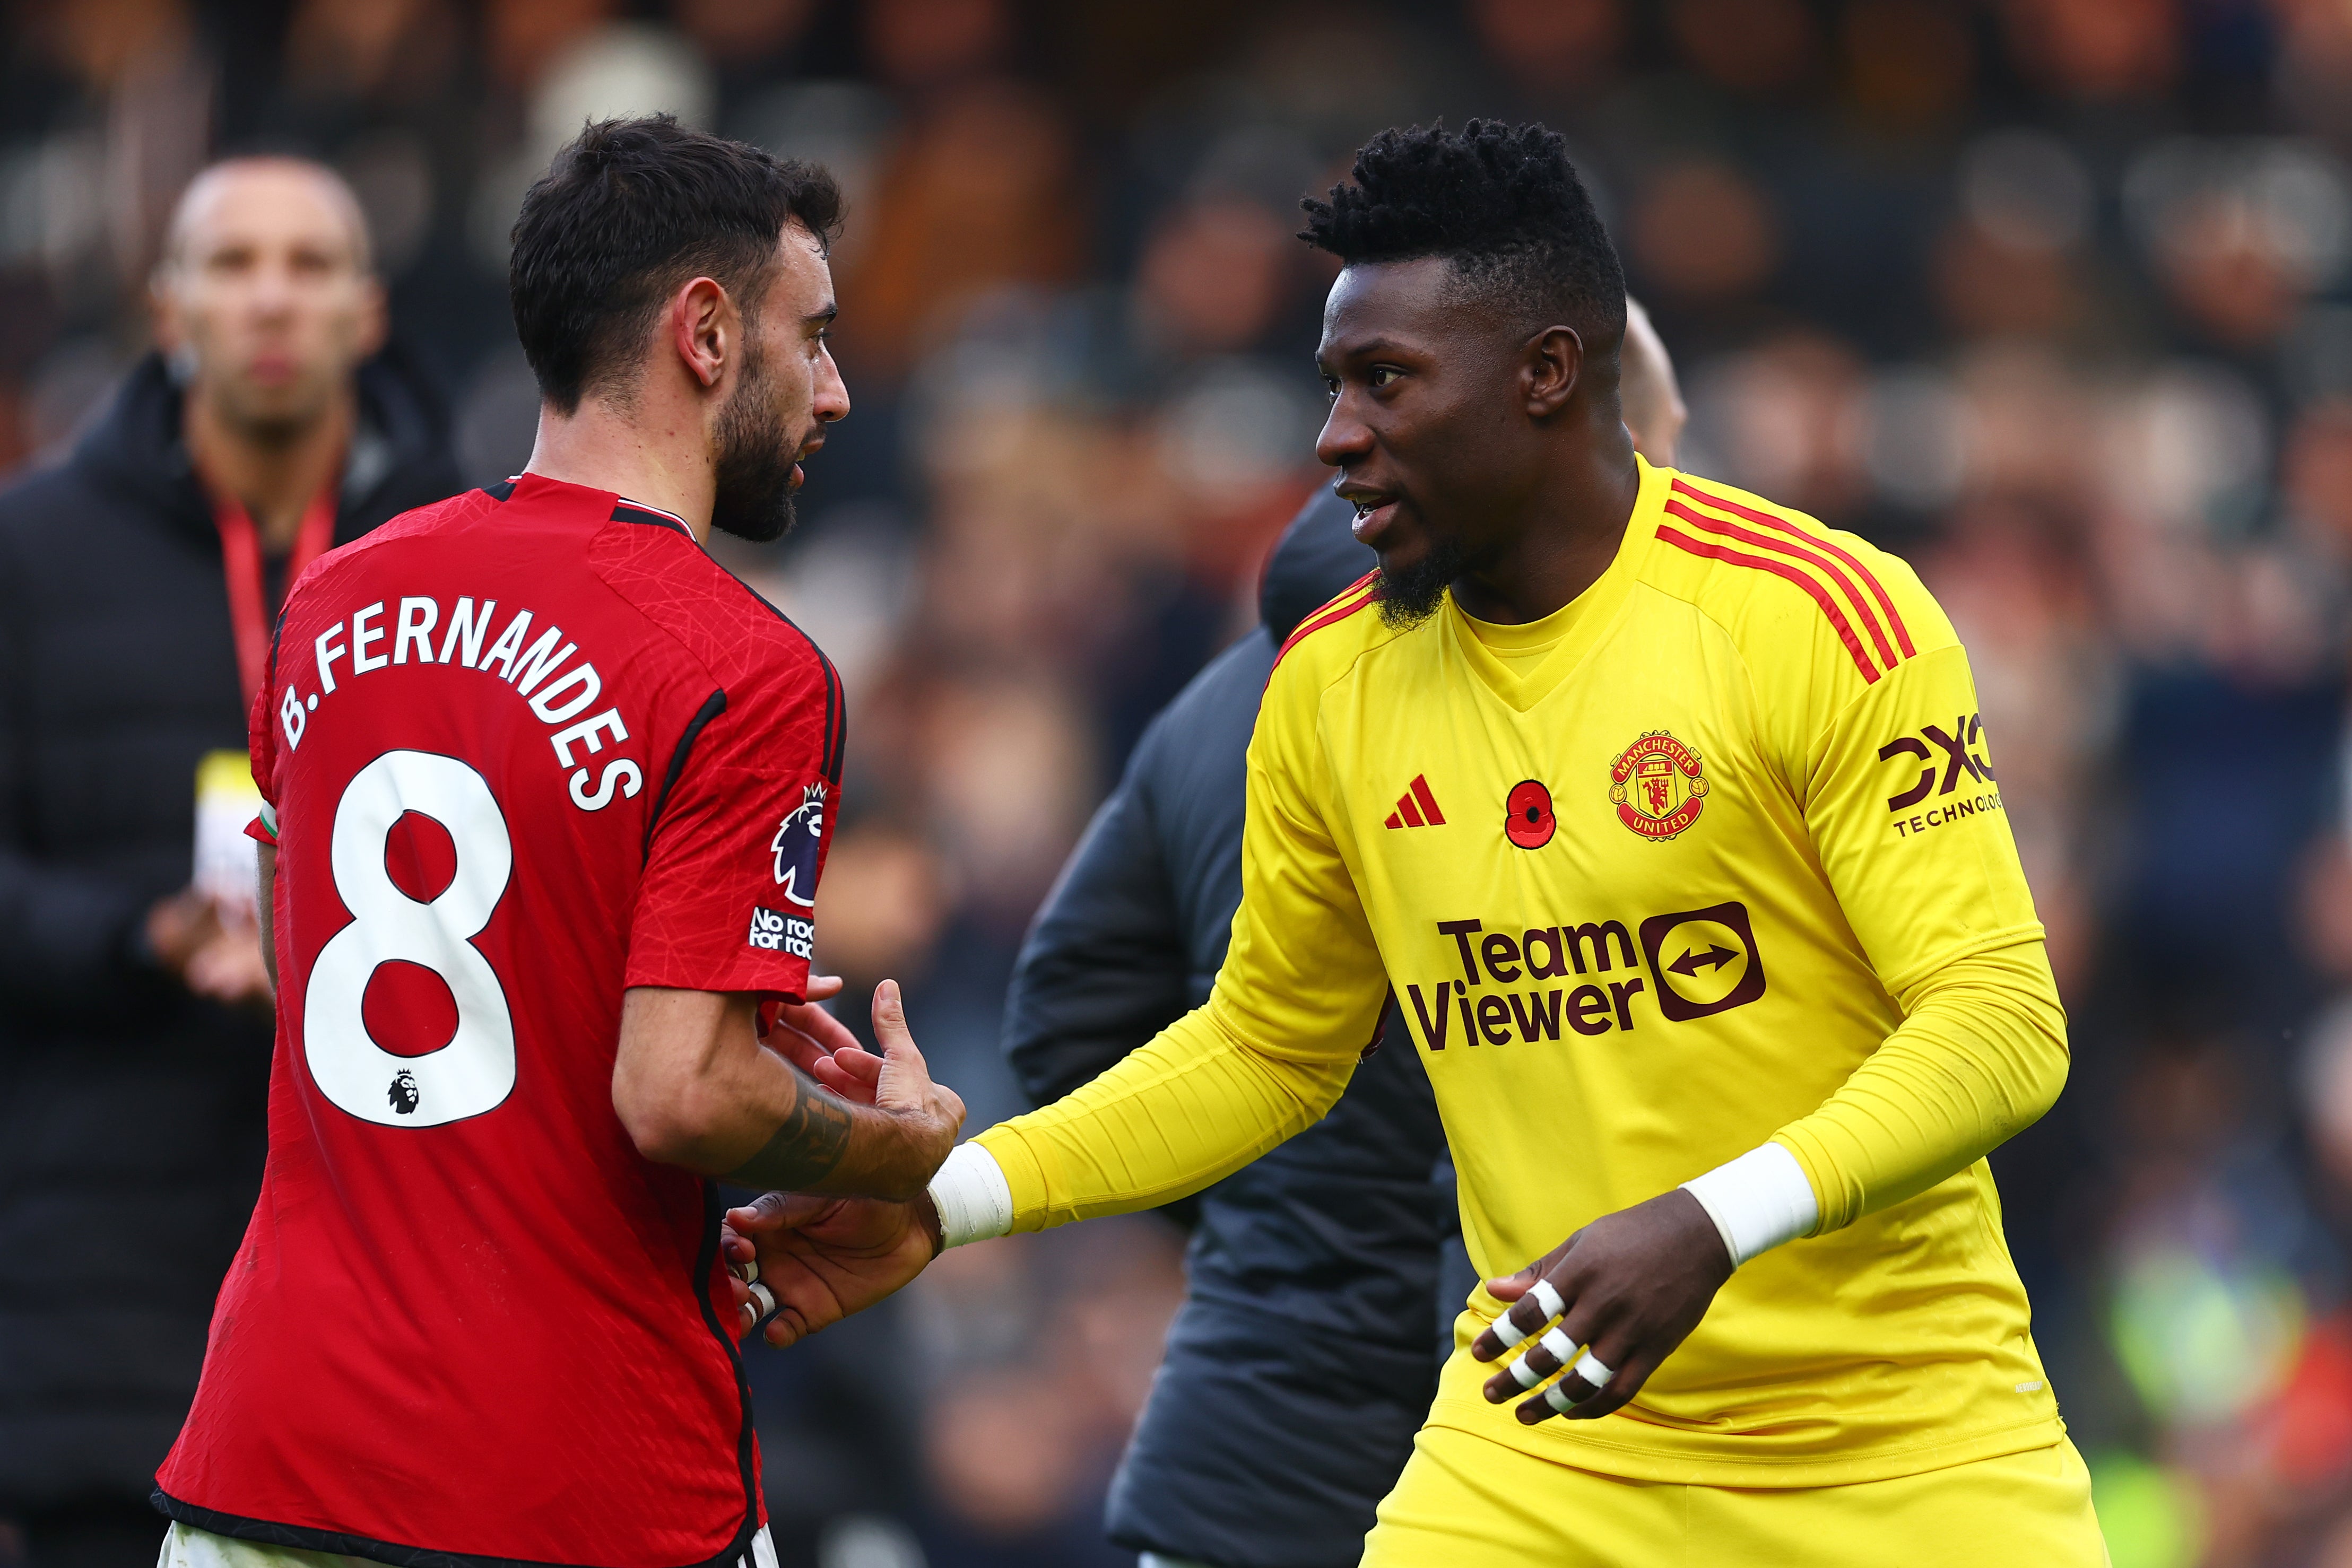 United were indebted to Andre Onana’s saves in the second half